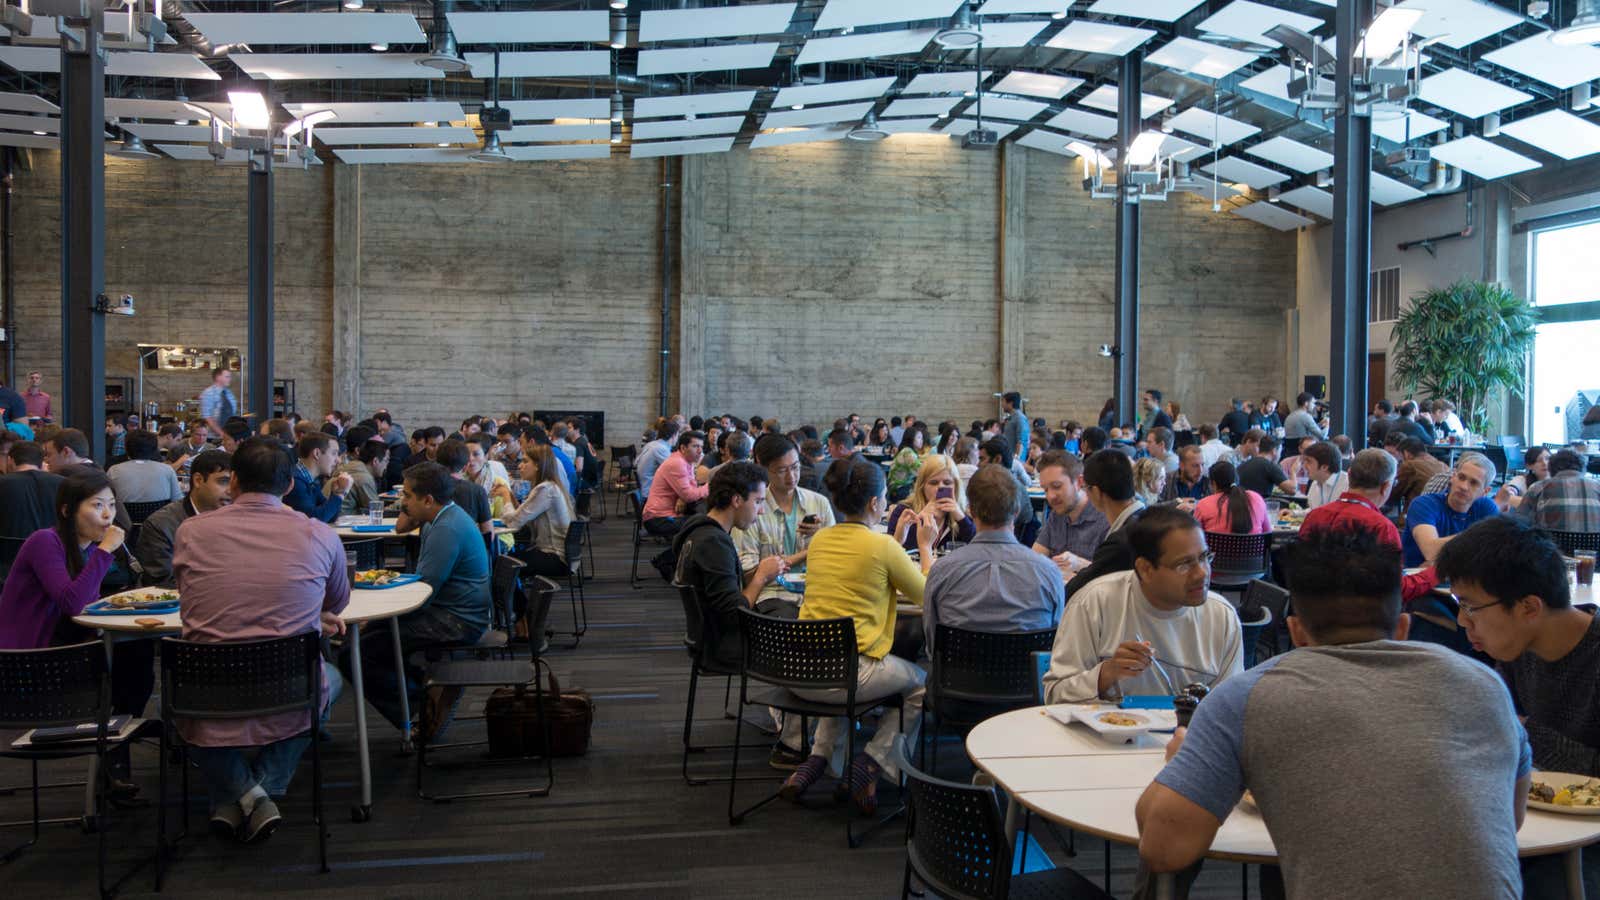 The cafeteria at Twitter’s new headquarters.